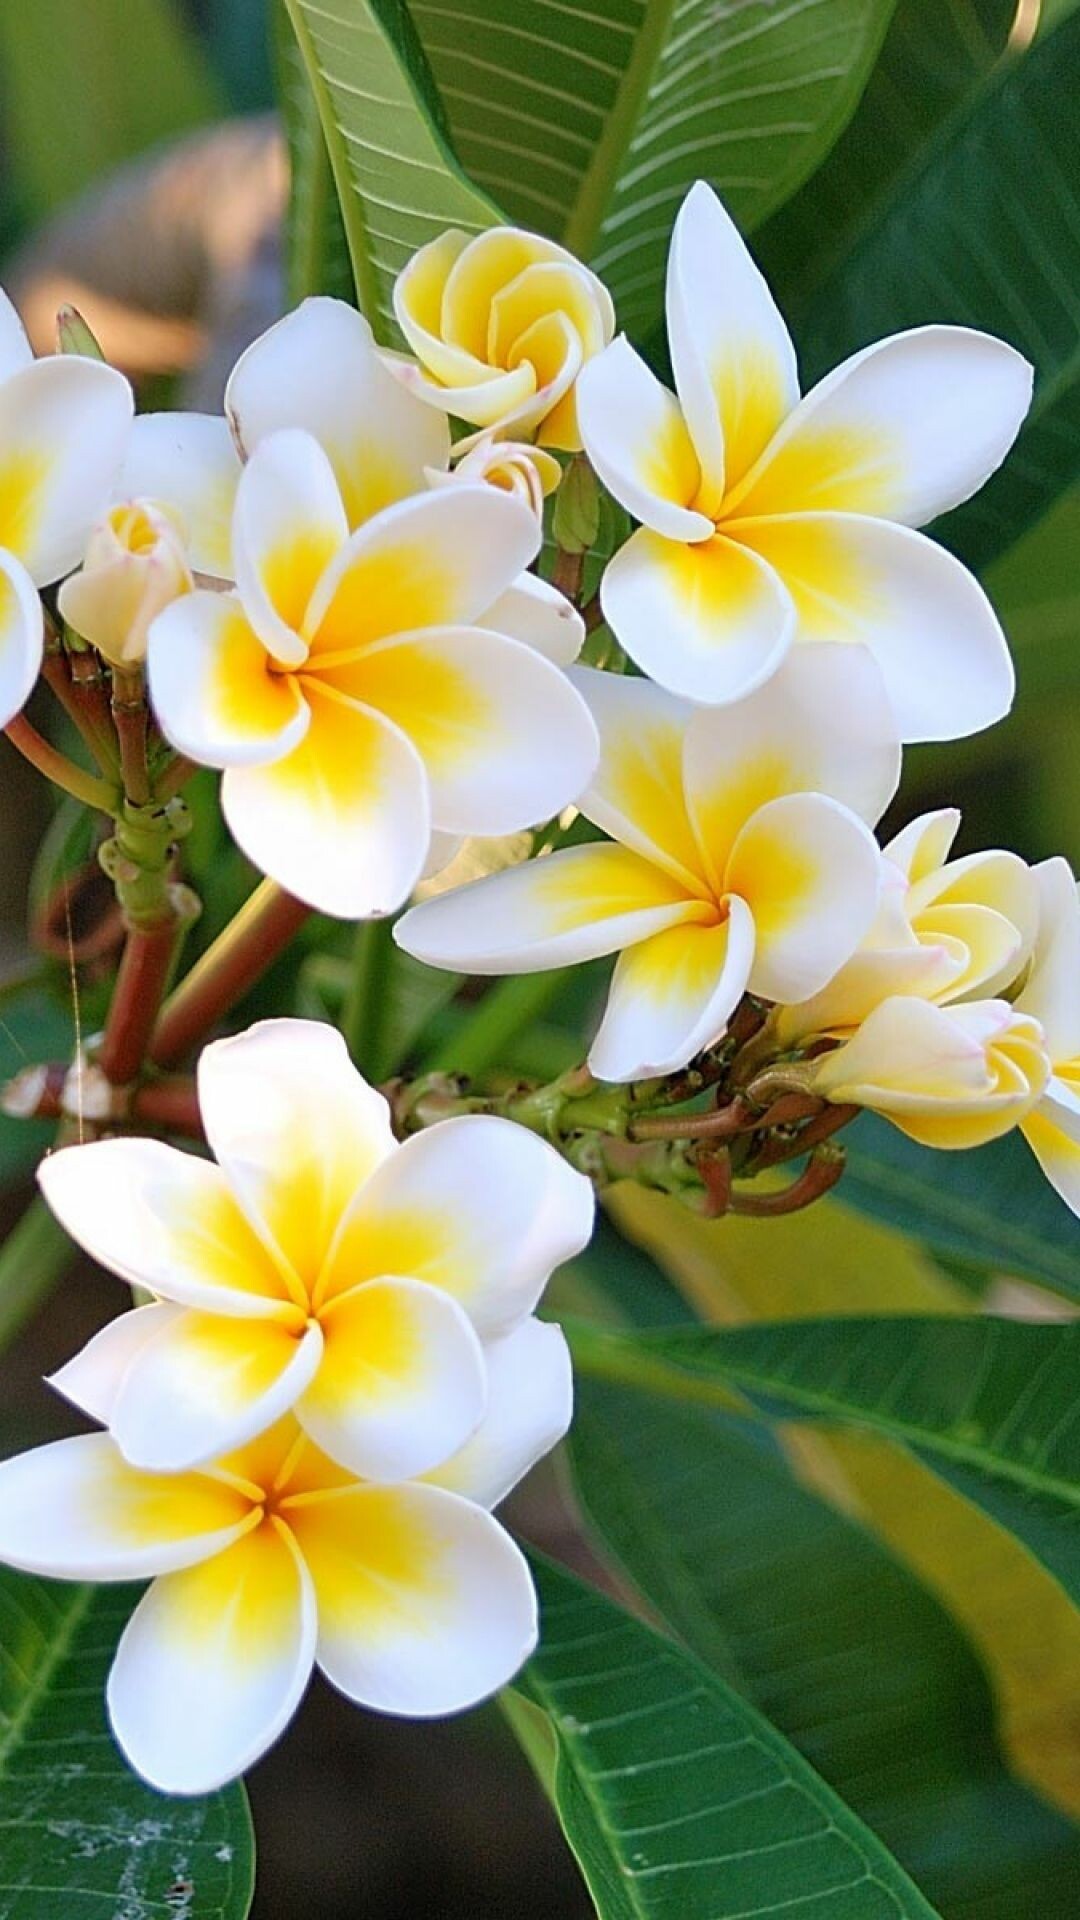 Frangipani Flower: The genus consists of numerous different small, flowering trees and shrubs, though the main thing that they all have in common is exceptionally gorgeous flowers. 1080x1920 Full HD Wallpaper.